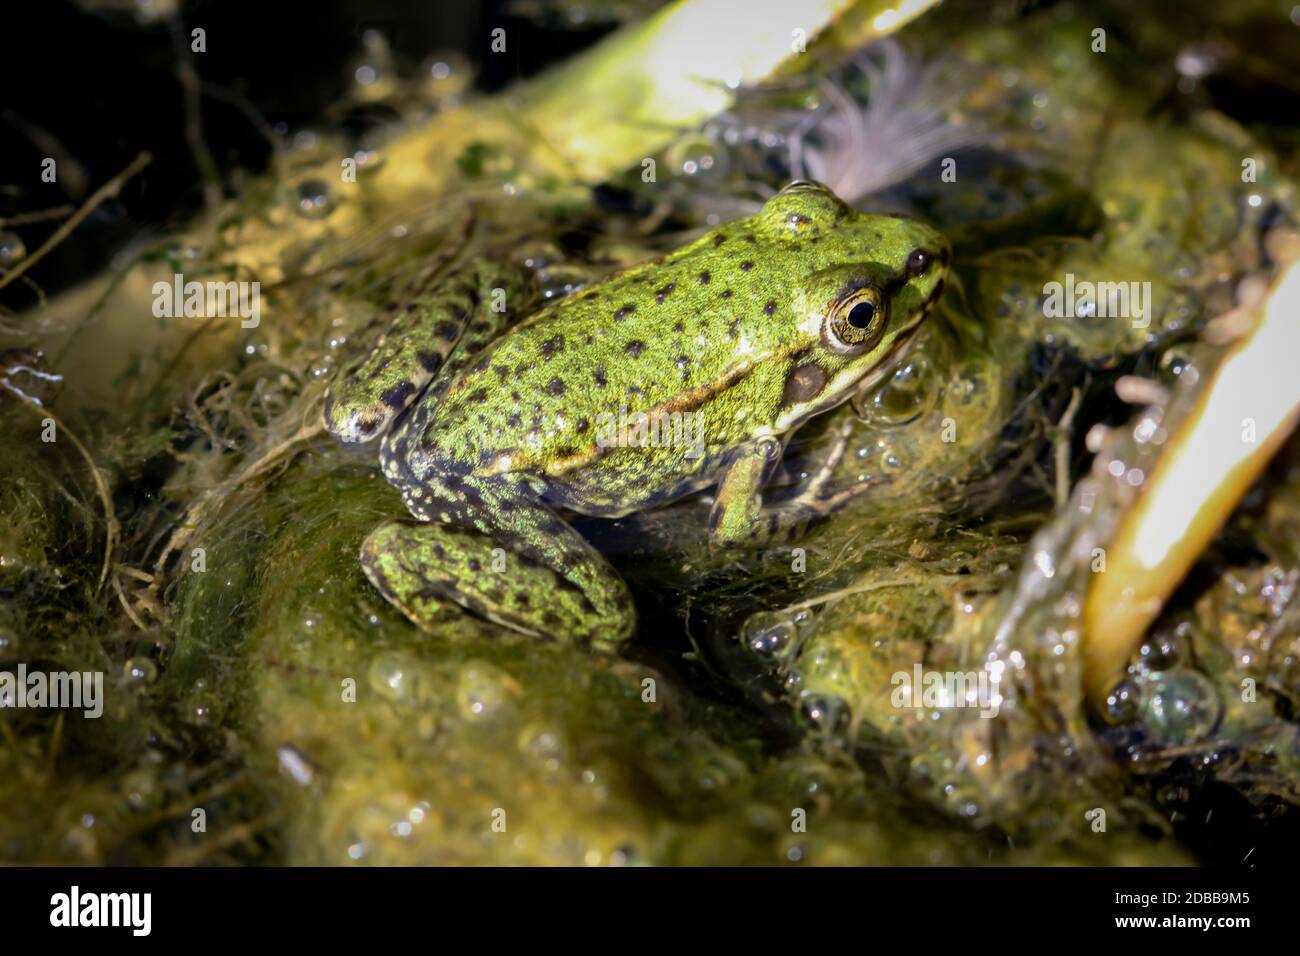 Close up of a frog in a pond. Stock Photo